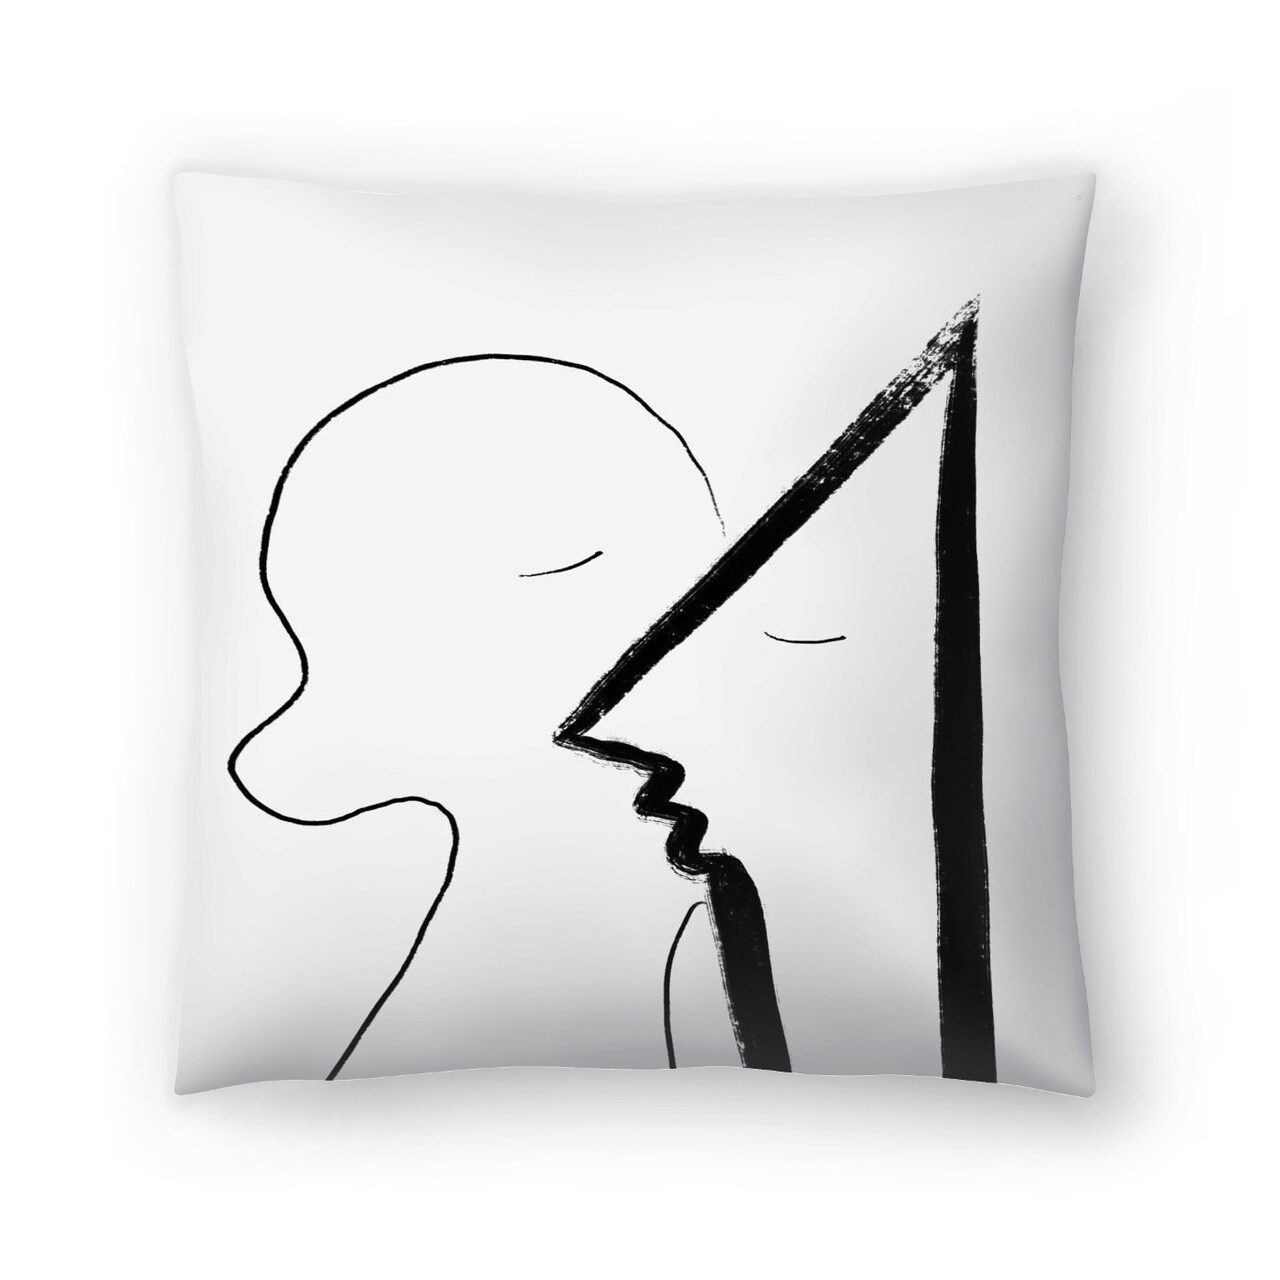 ASweet Kiss by Atelier Posters Throw Pillow Americanflat Decorative Pillow